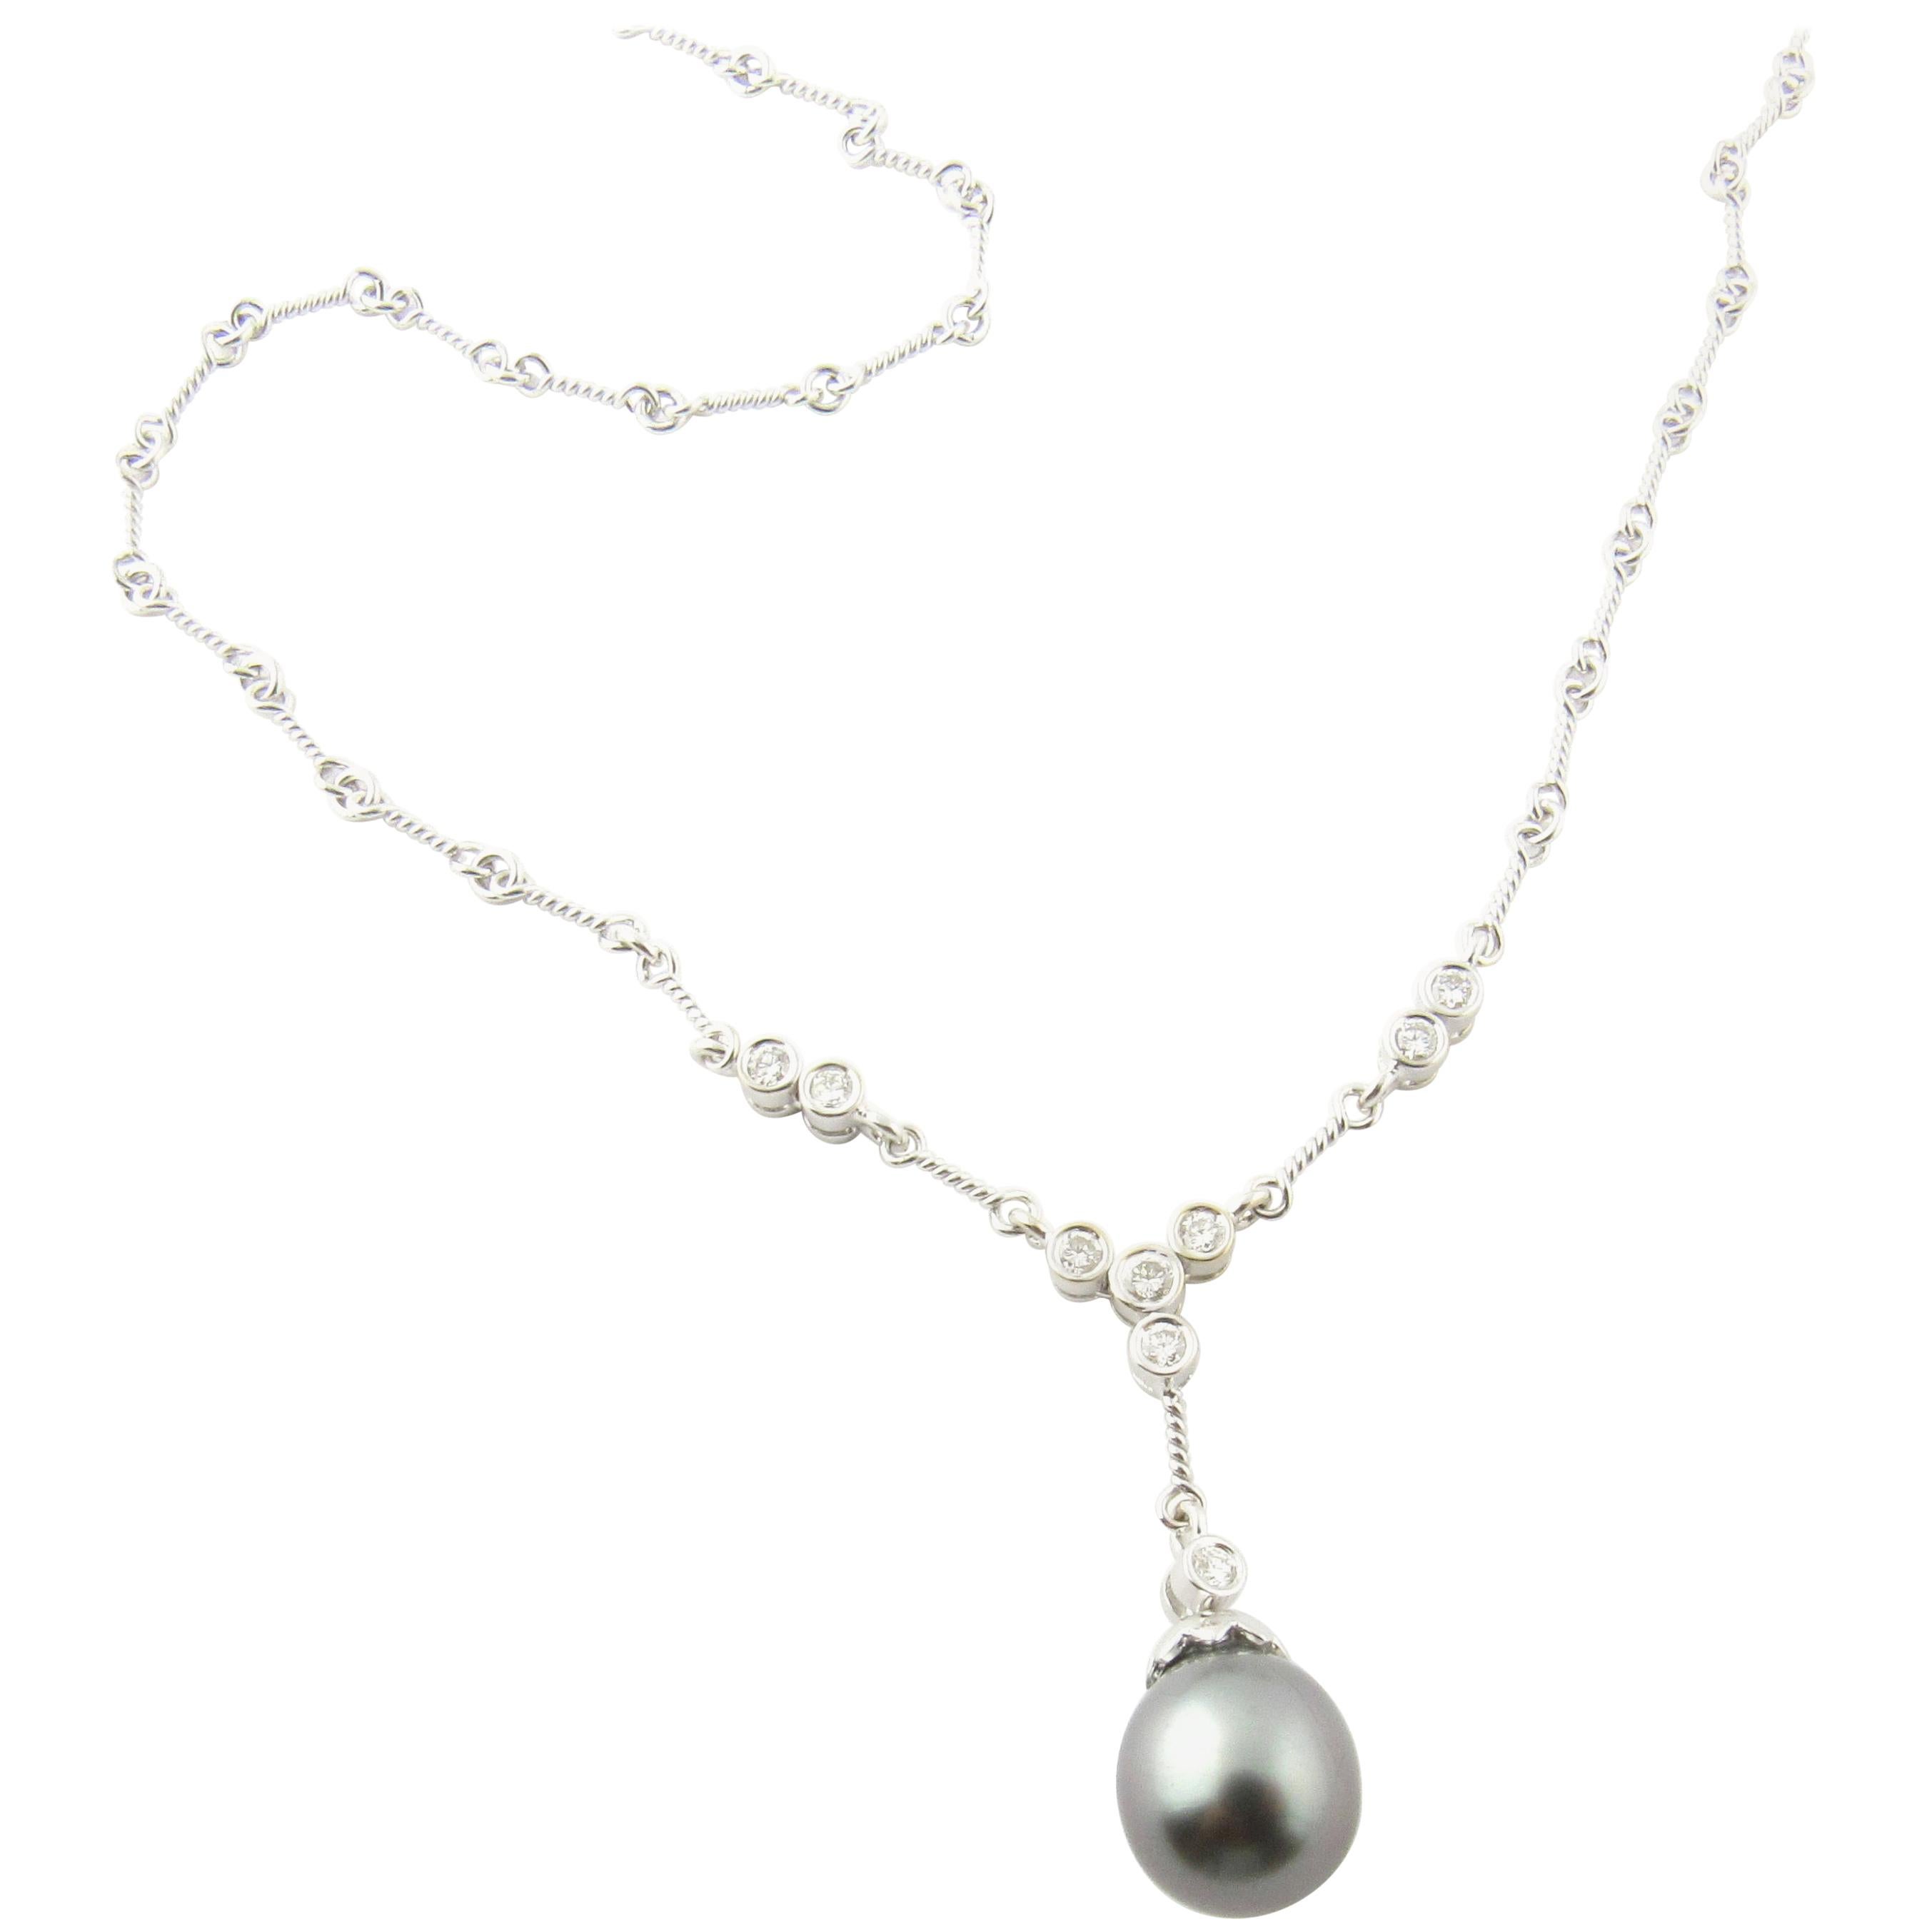 18 Karat White Gold Grey Pearl and Diamond Necklace